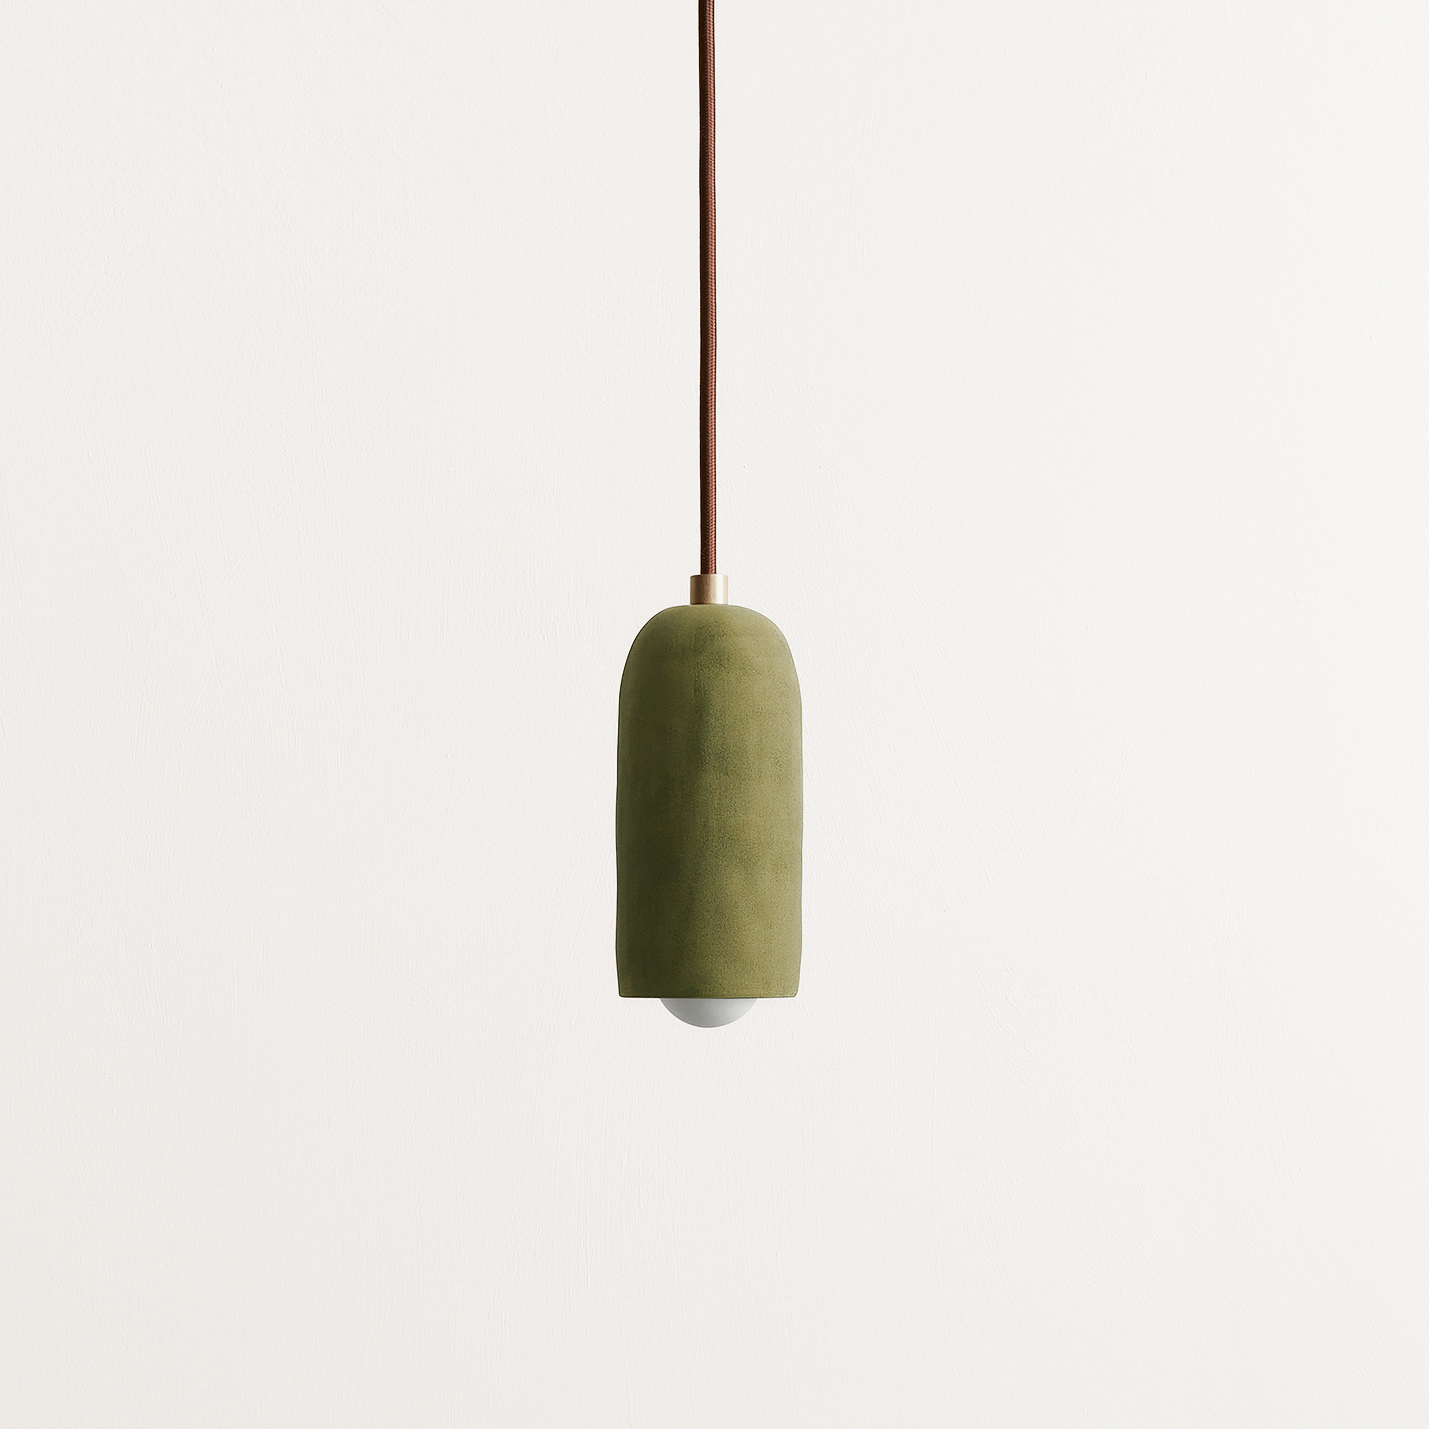 Ceramic Spot Pendant by in common with